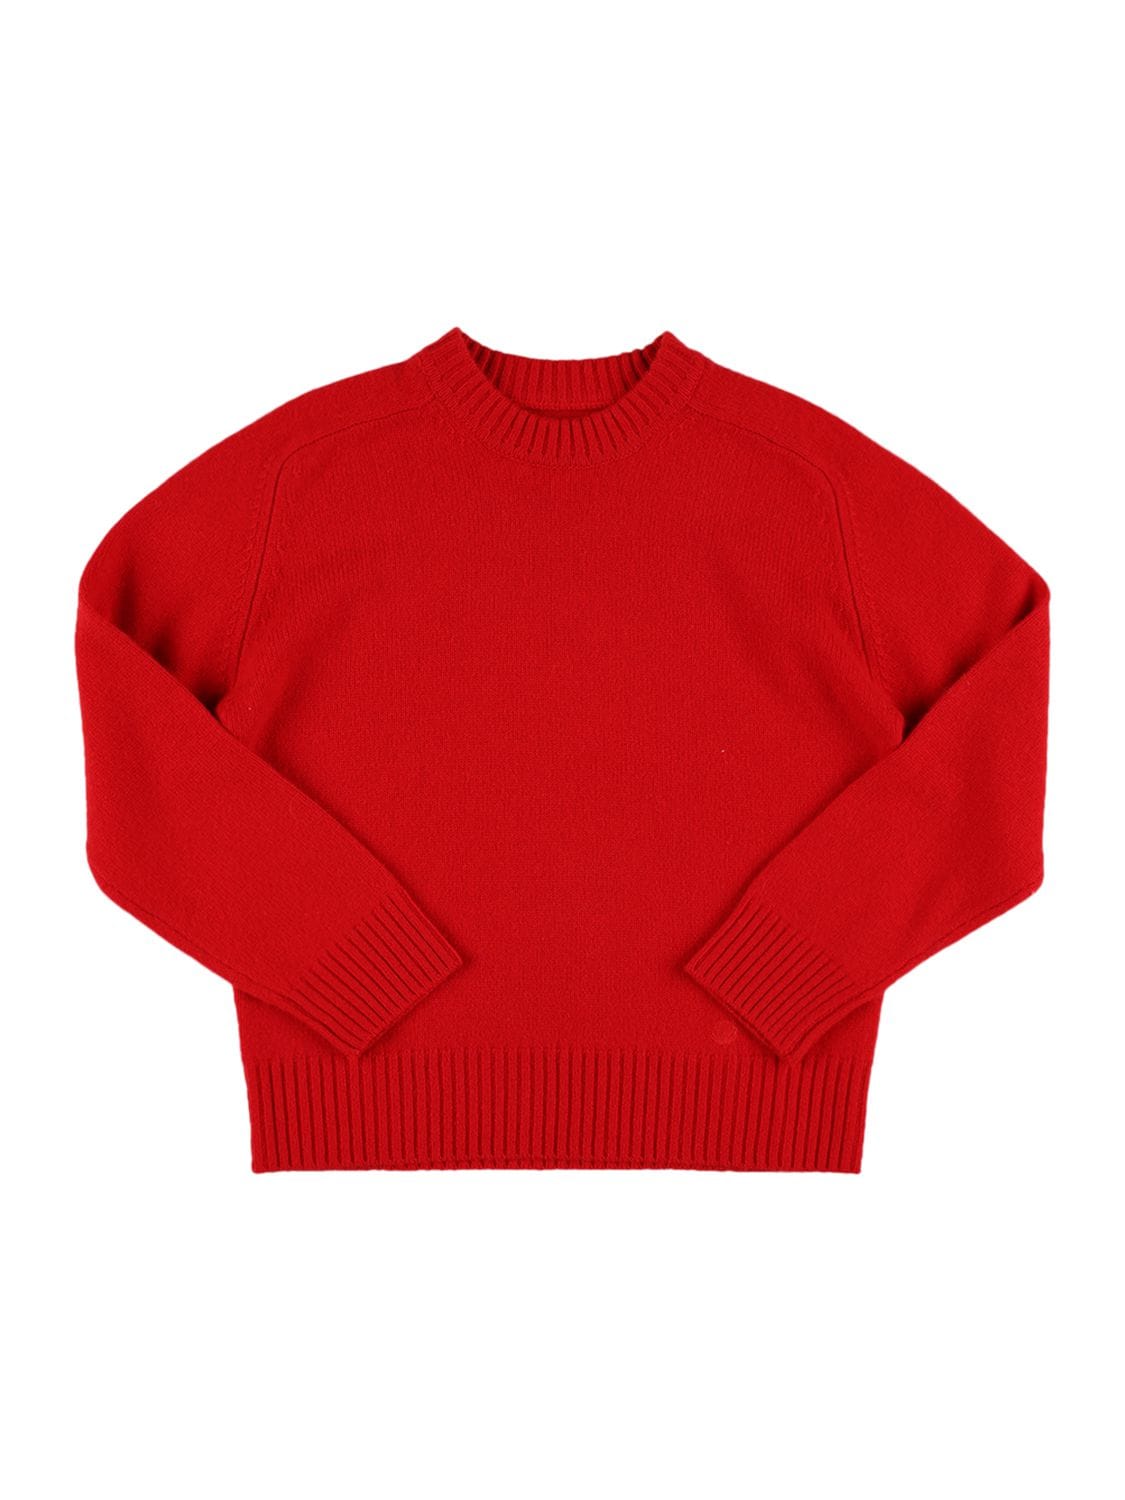 Image of Cashmere Sweater